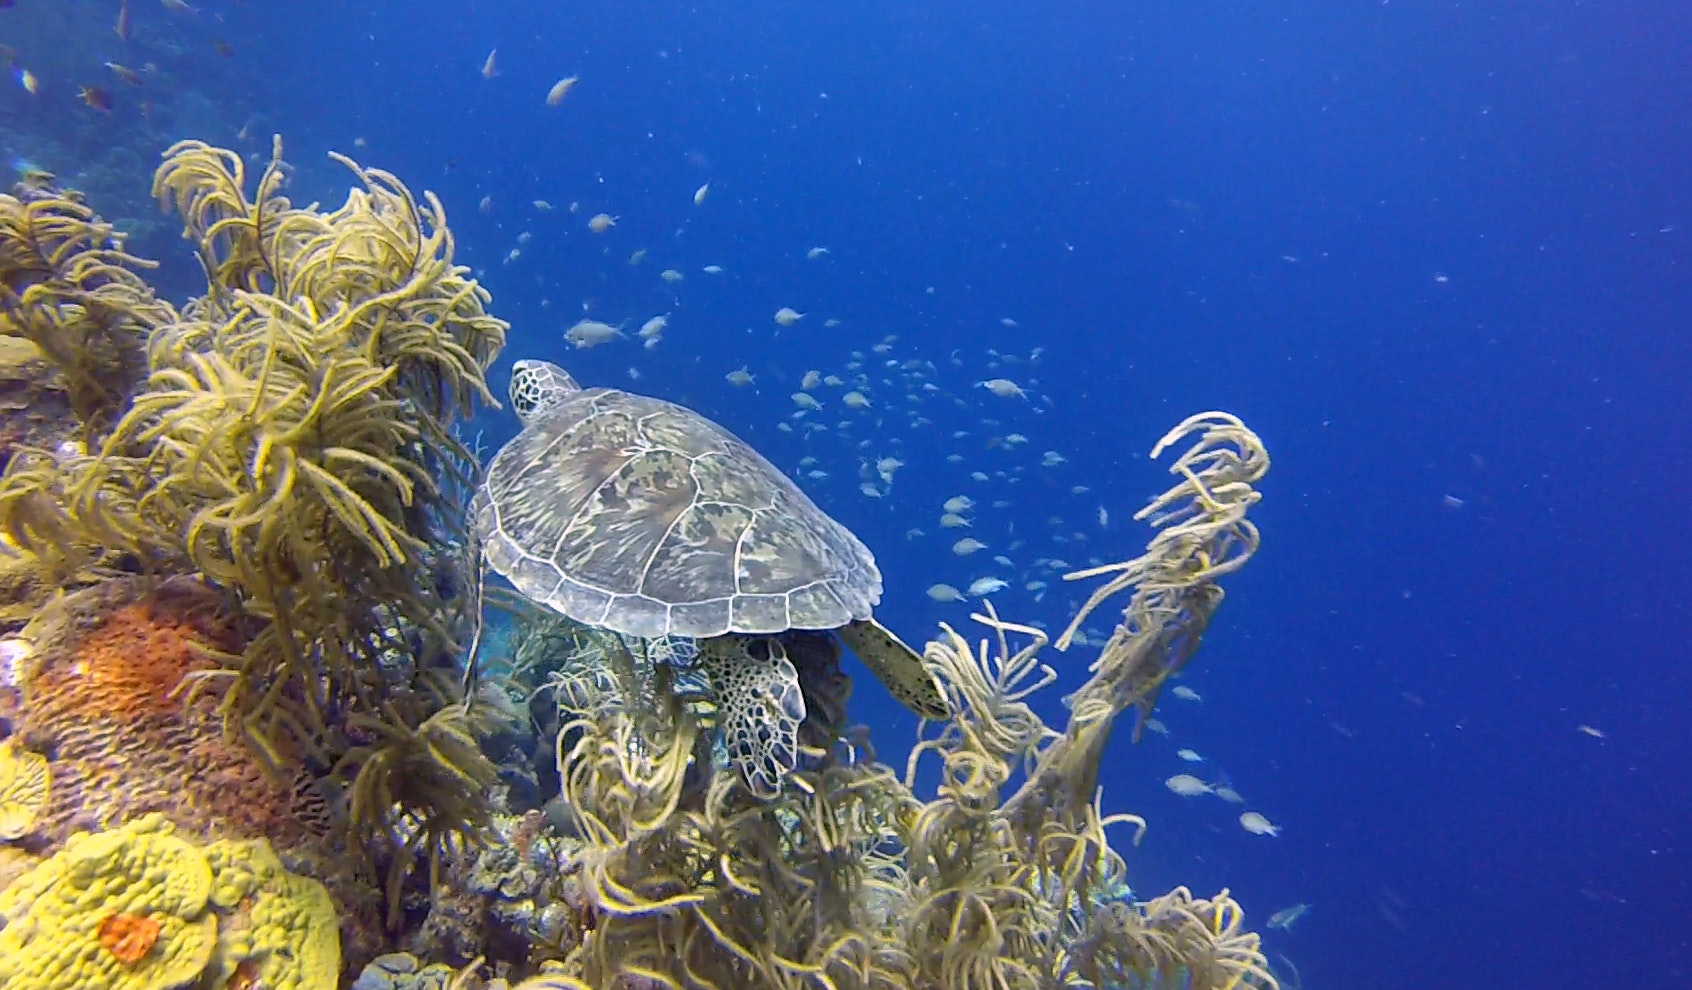 A sea turtle swims away from the viewer over a brilliant coral reef covered in underwater plants with tubular, pale green fronds over orange and chartreuse coral. Small silver fish swim in the background amidst deep, bright blue waters.